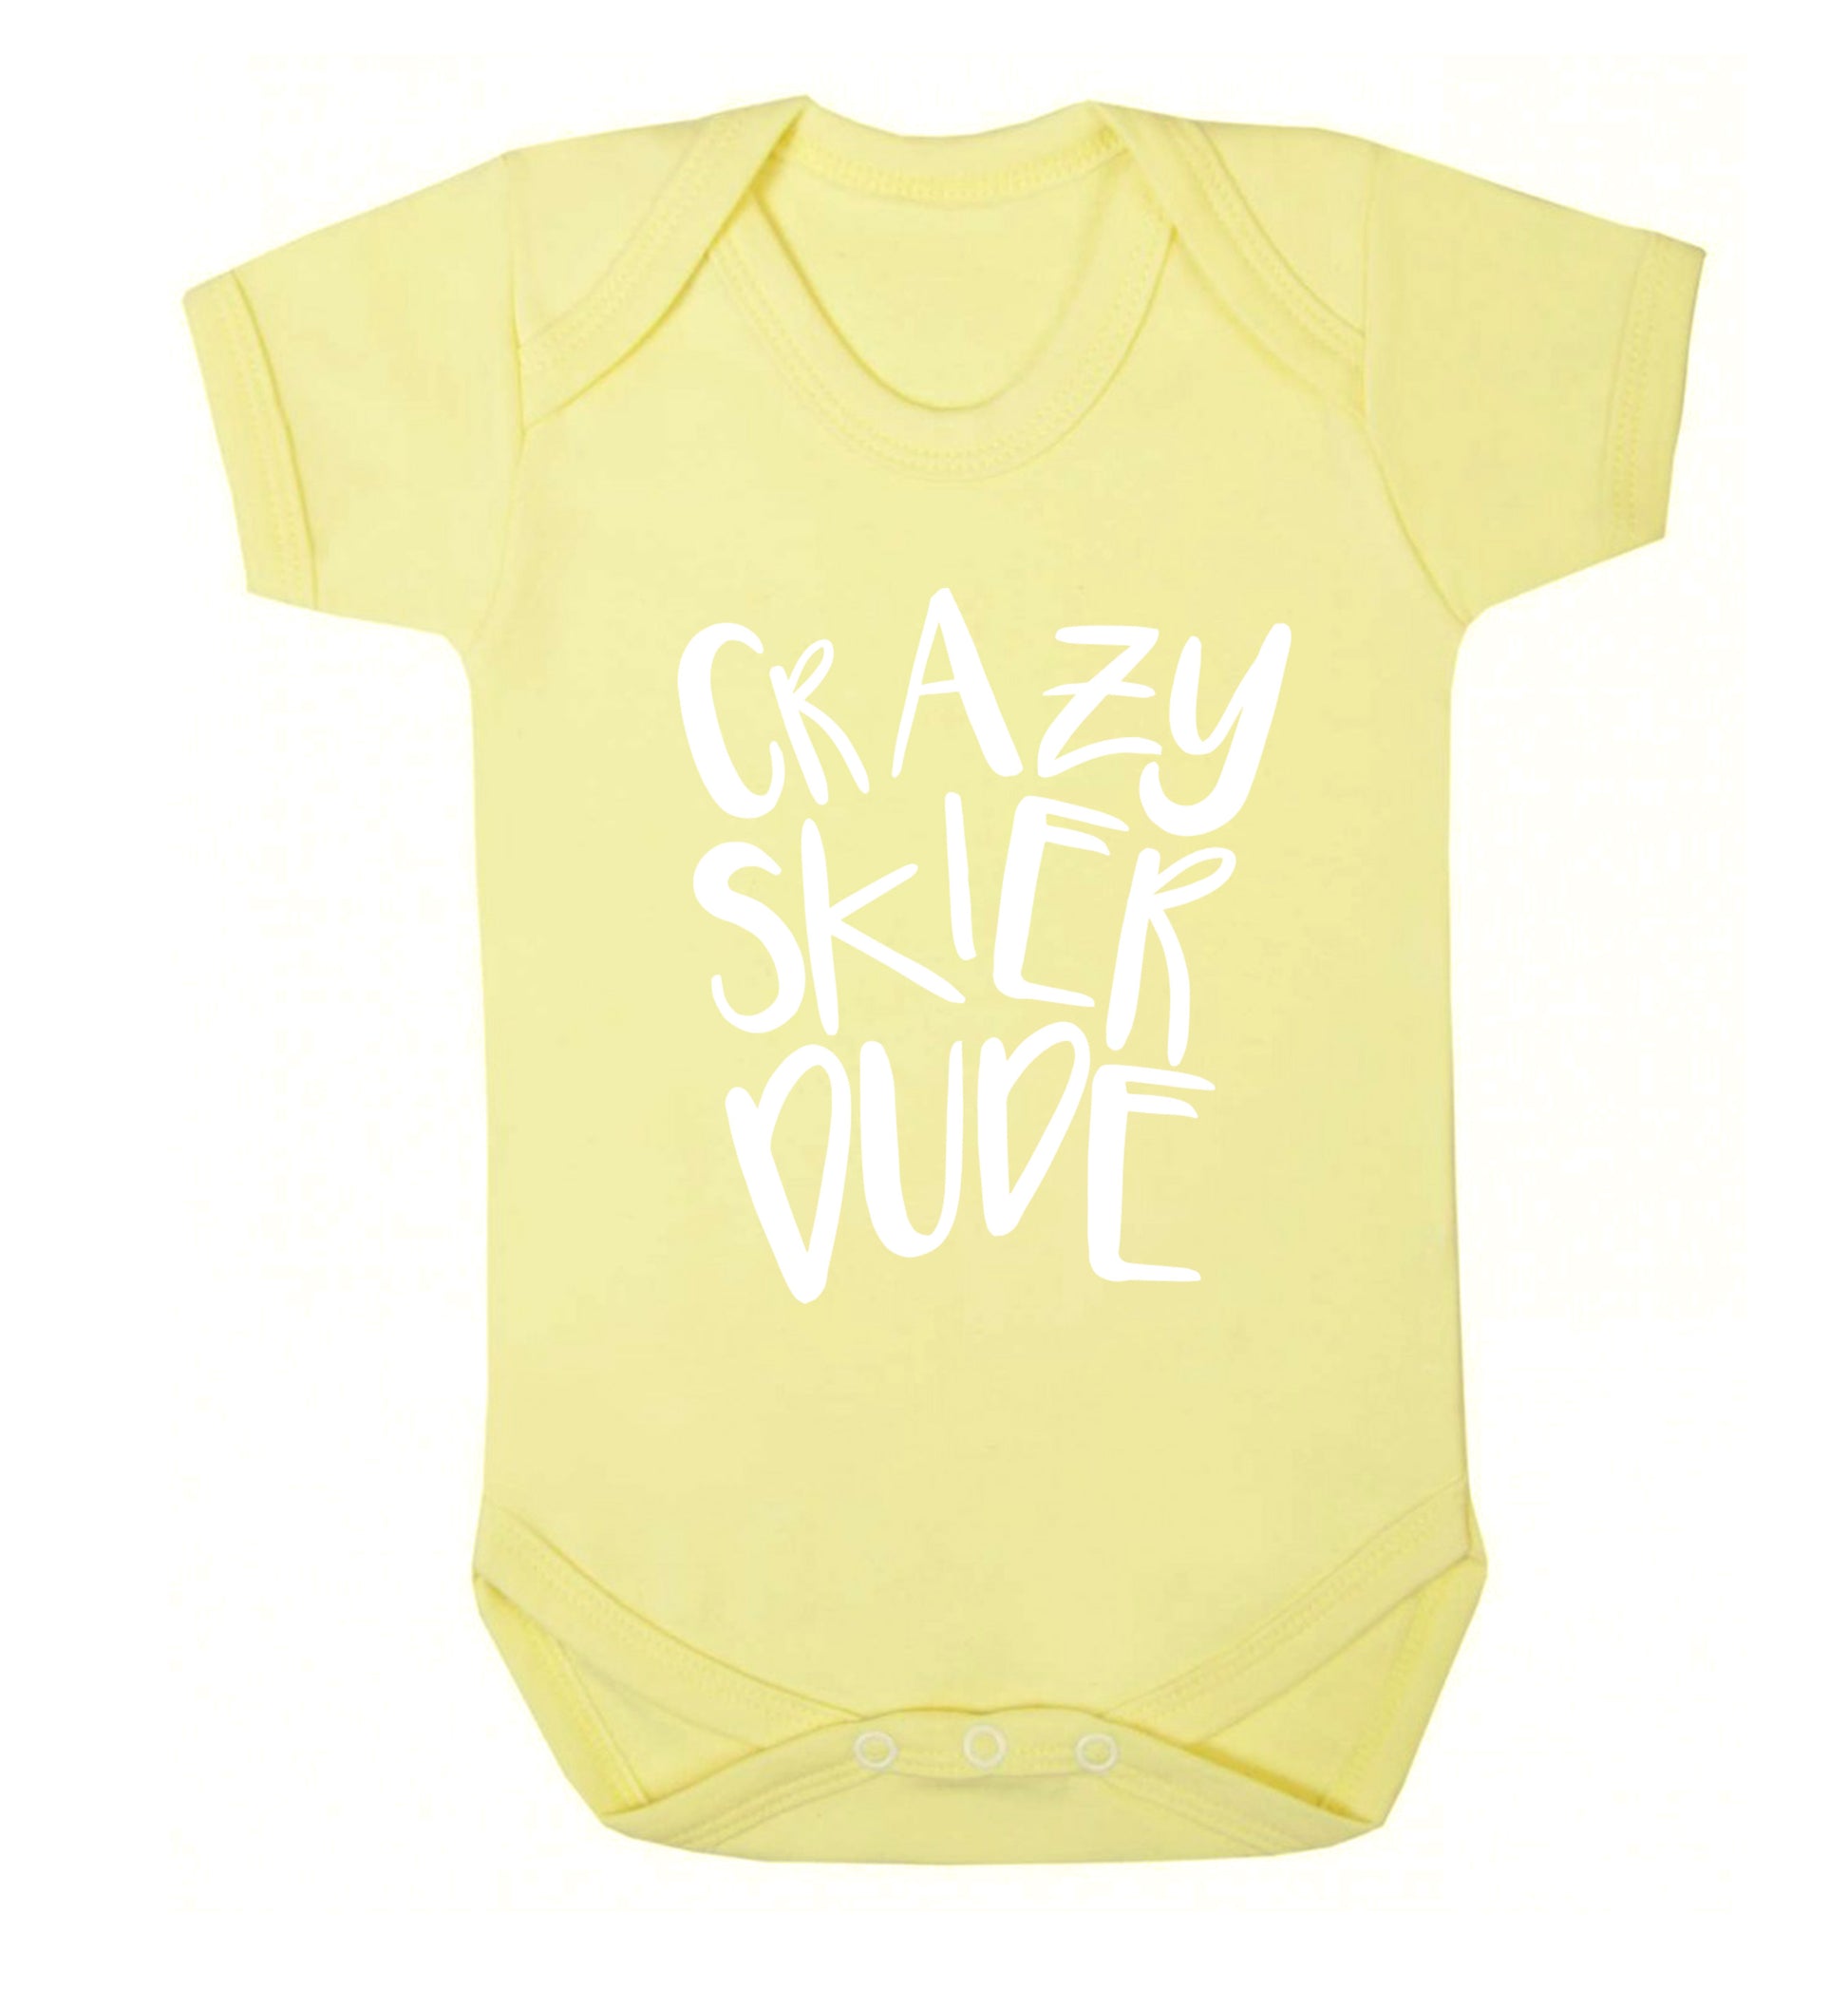 Crazy skier dude Baby Vest pale yellow 18-24 months